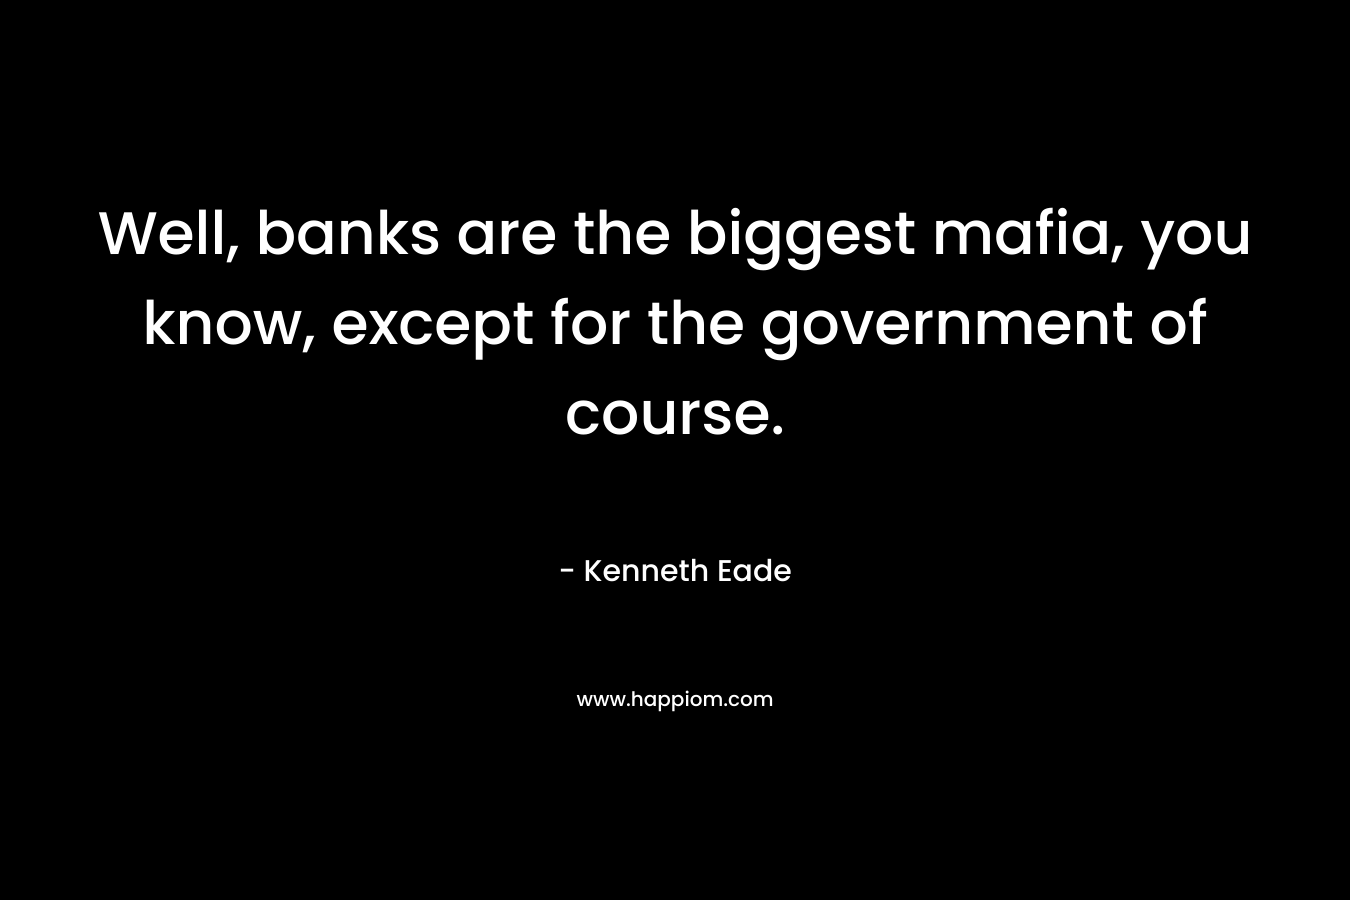 Well, banks are the biggest mafia, you know, except for the government of course.